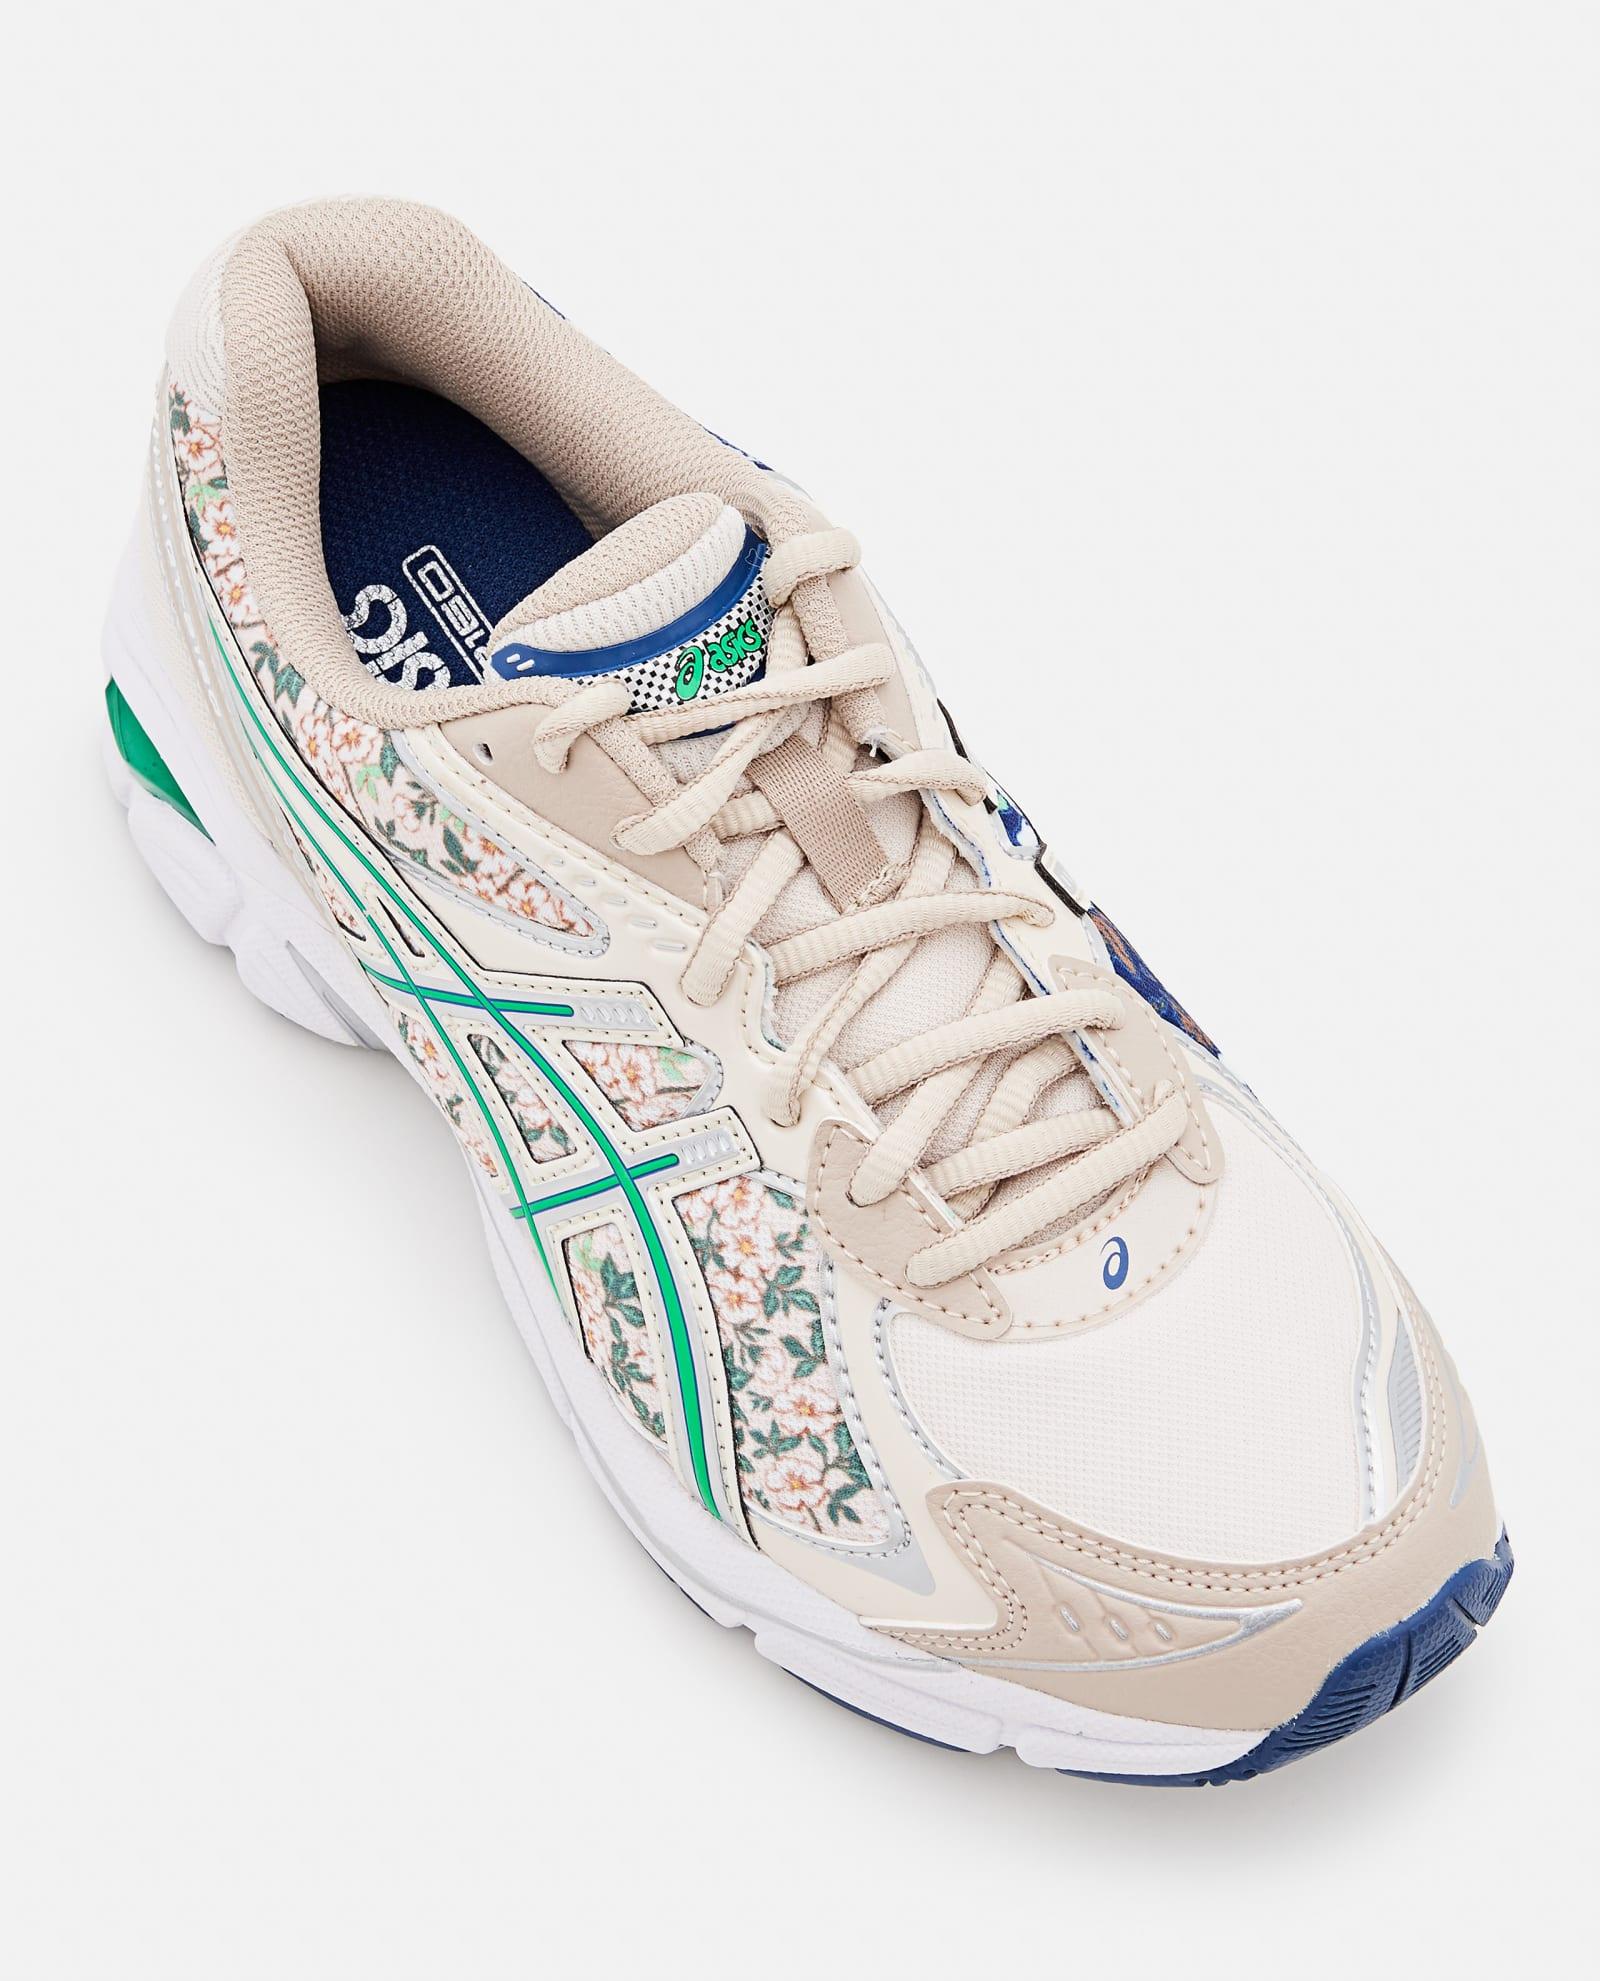 Asics Gt-2160 Sneakers in White | Lyst